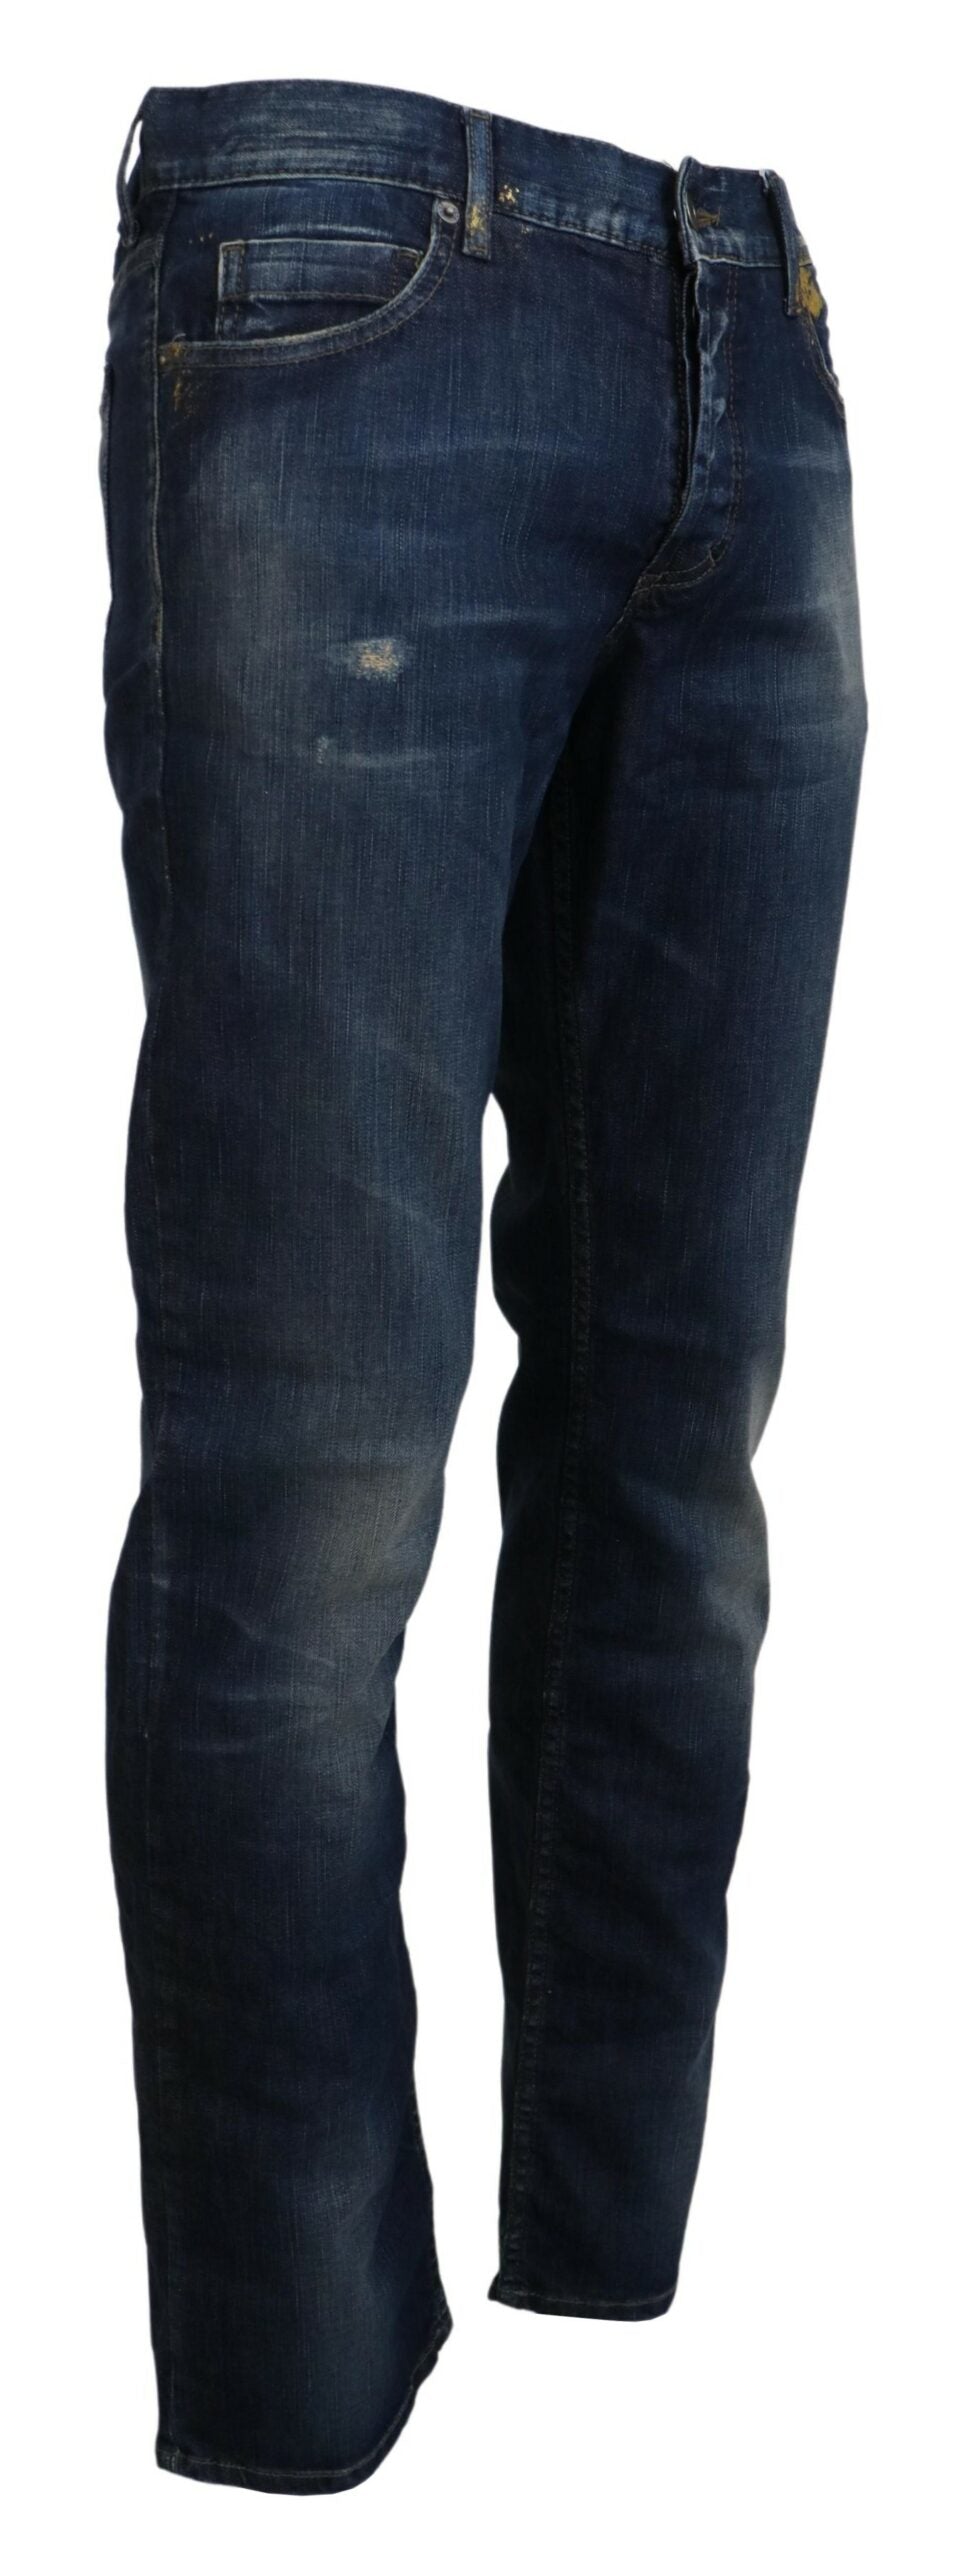 Exte Blue Washed Cotton Straight Fit Men Casual Denim Jeans - Designed by Exte Available to Buy at a Discounted Price on Moon Behind The Hill Online Designer Discount Store